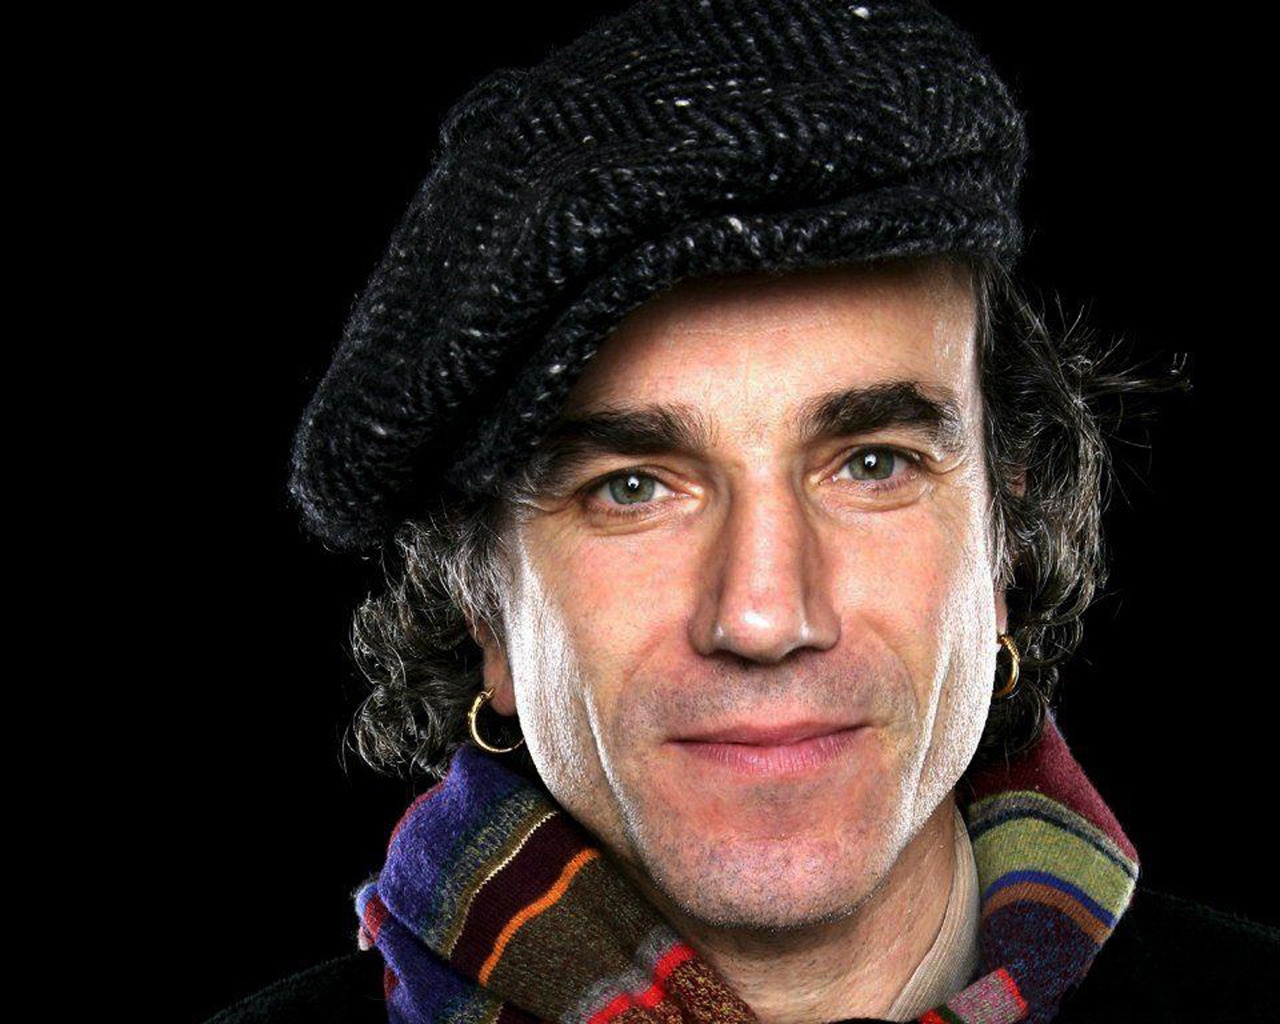 Daniel Day-Lewis for 1280 x 1024 resolution